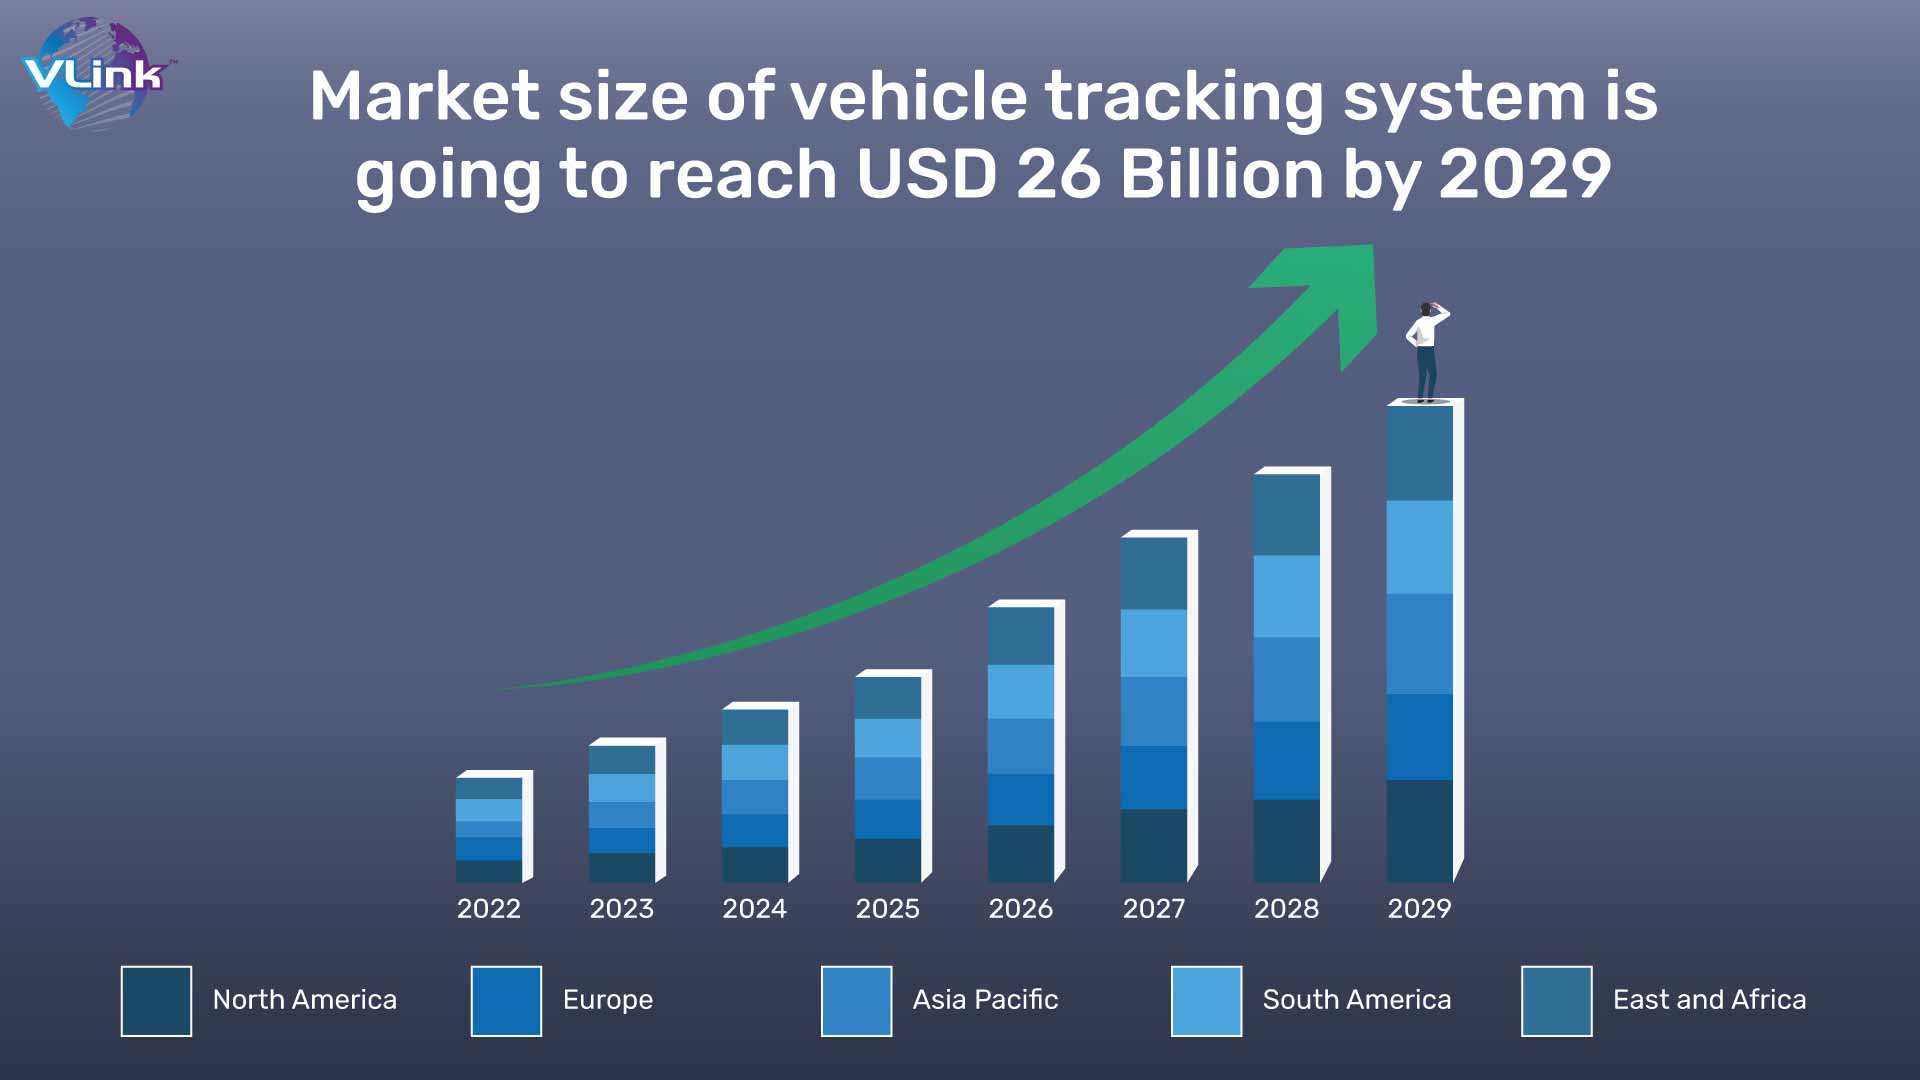 Market size of vehicle tracking system is going to reach USD 26 Billion by 2029